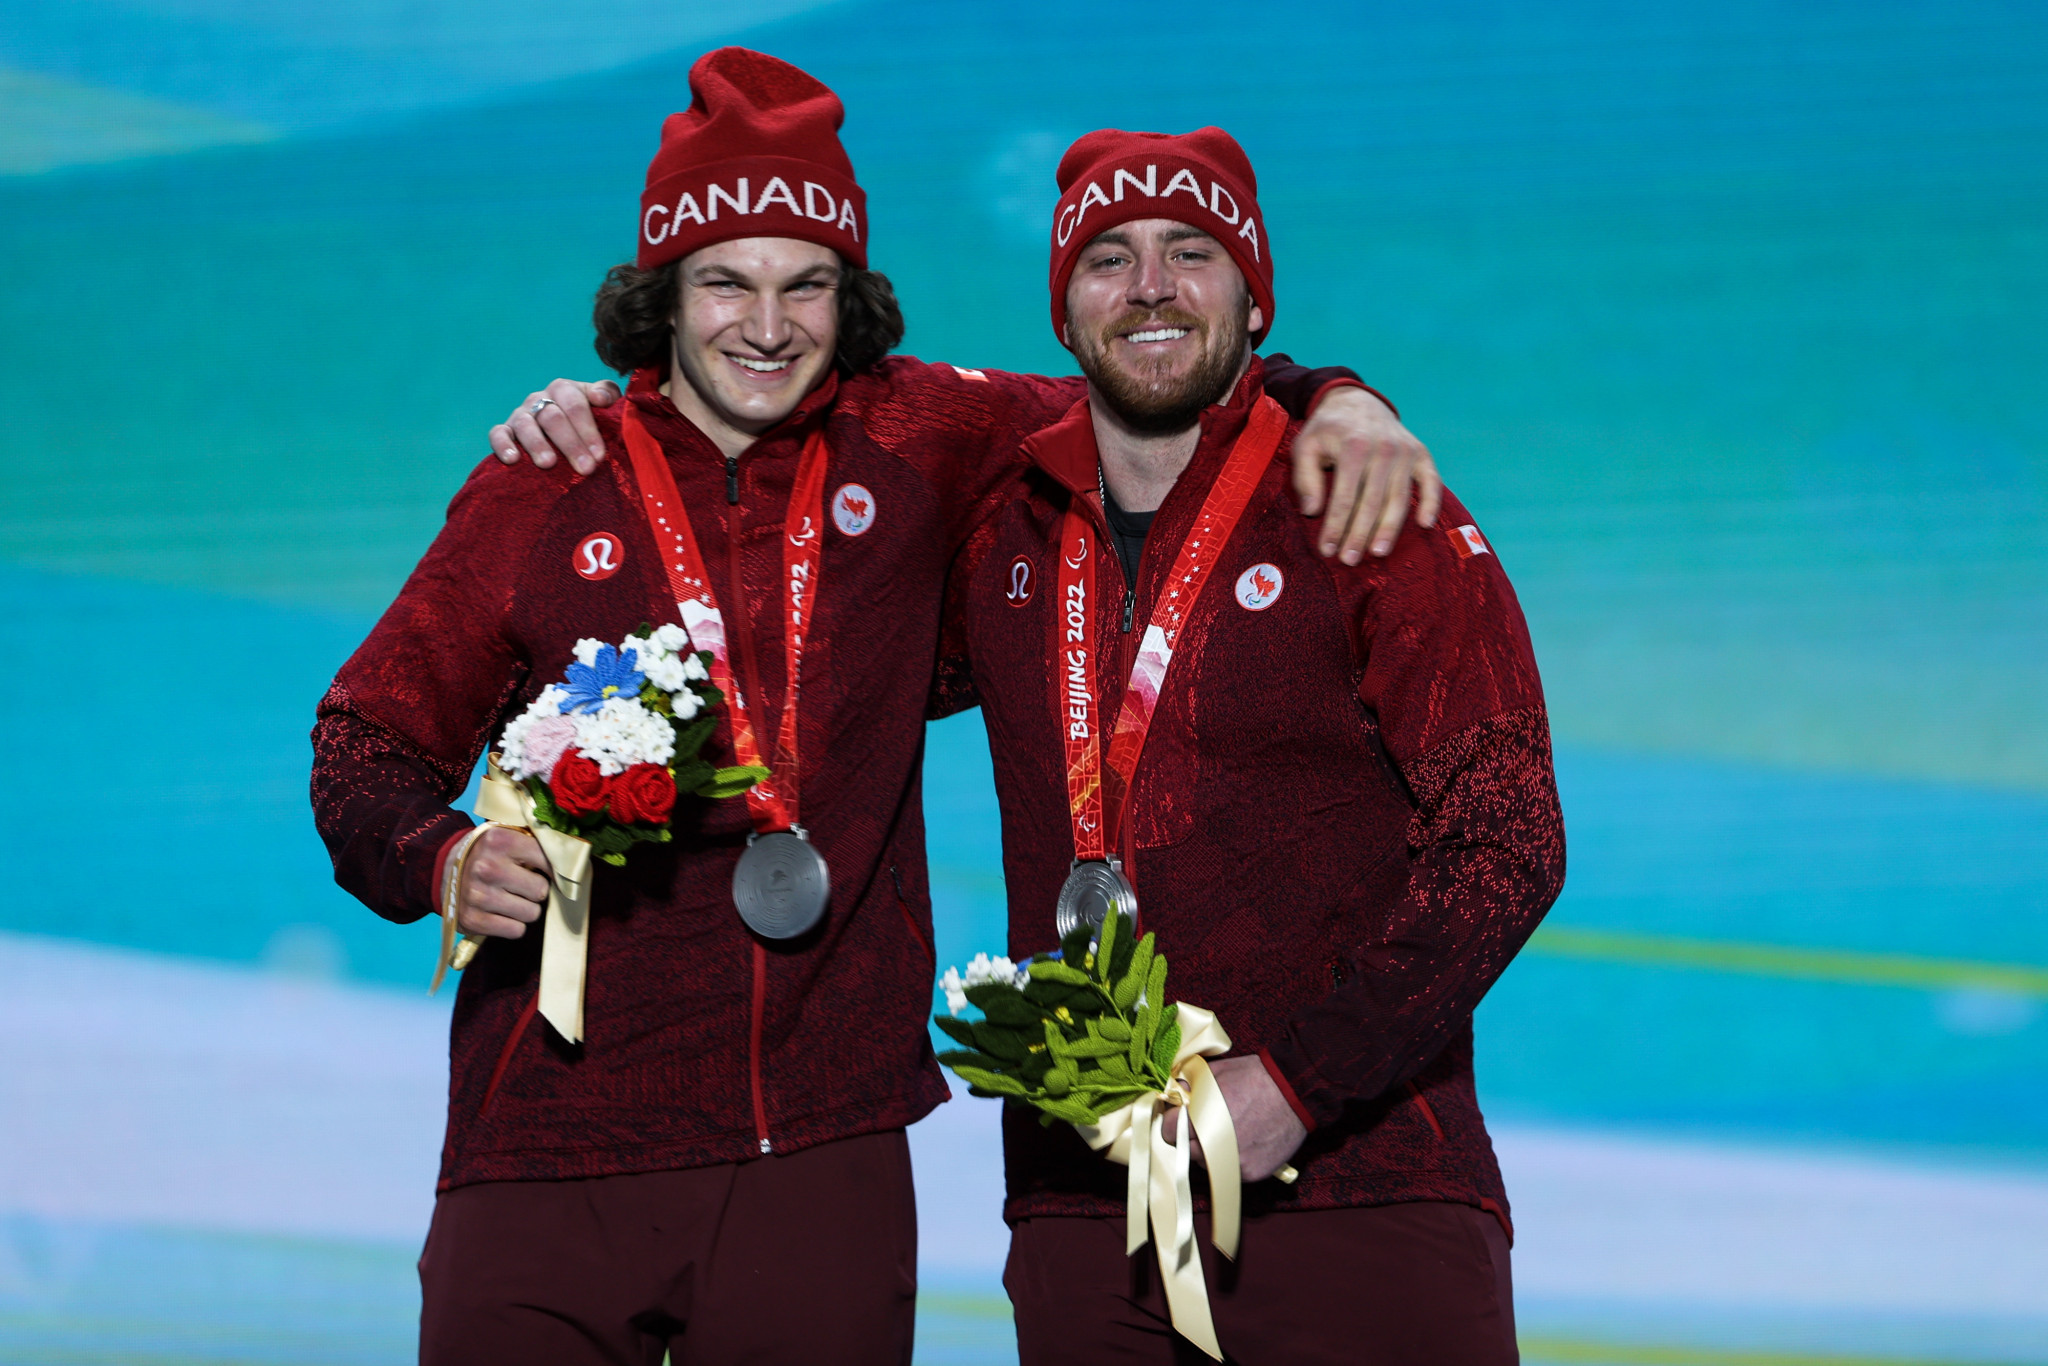 Mac Marcoux, right, and his guide Tristan Rodgers won silver medals in the men's downhill vision impaired category ©Getty Images